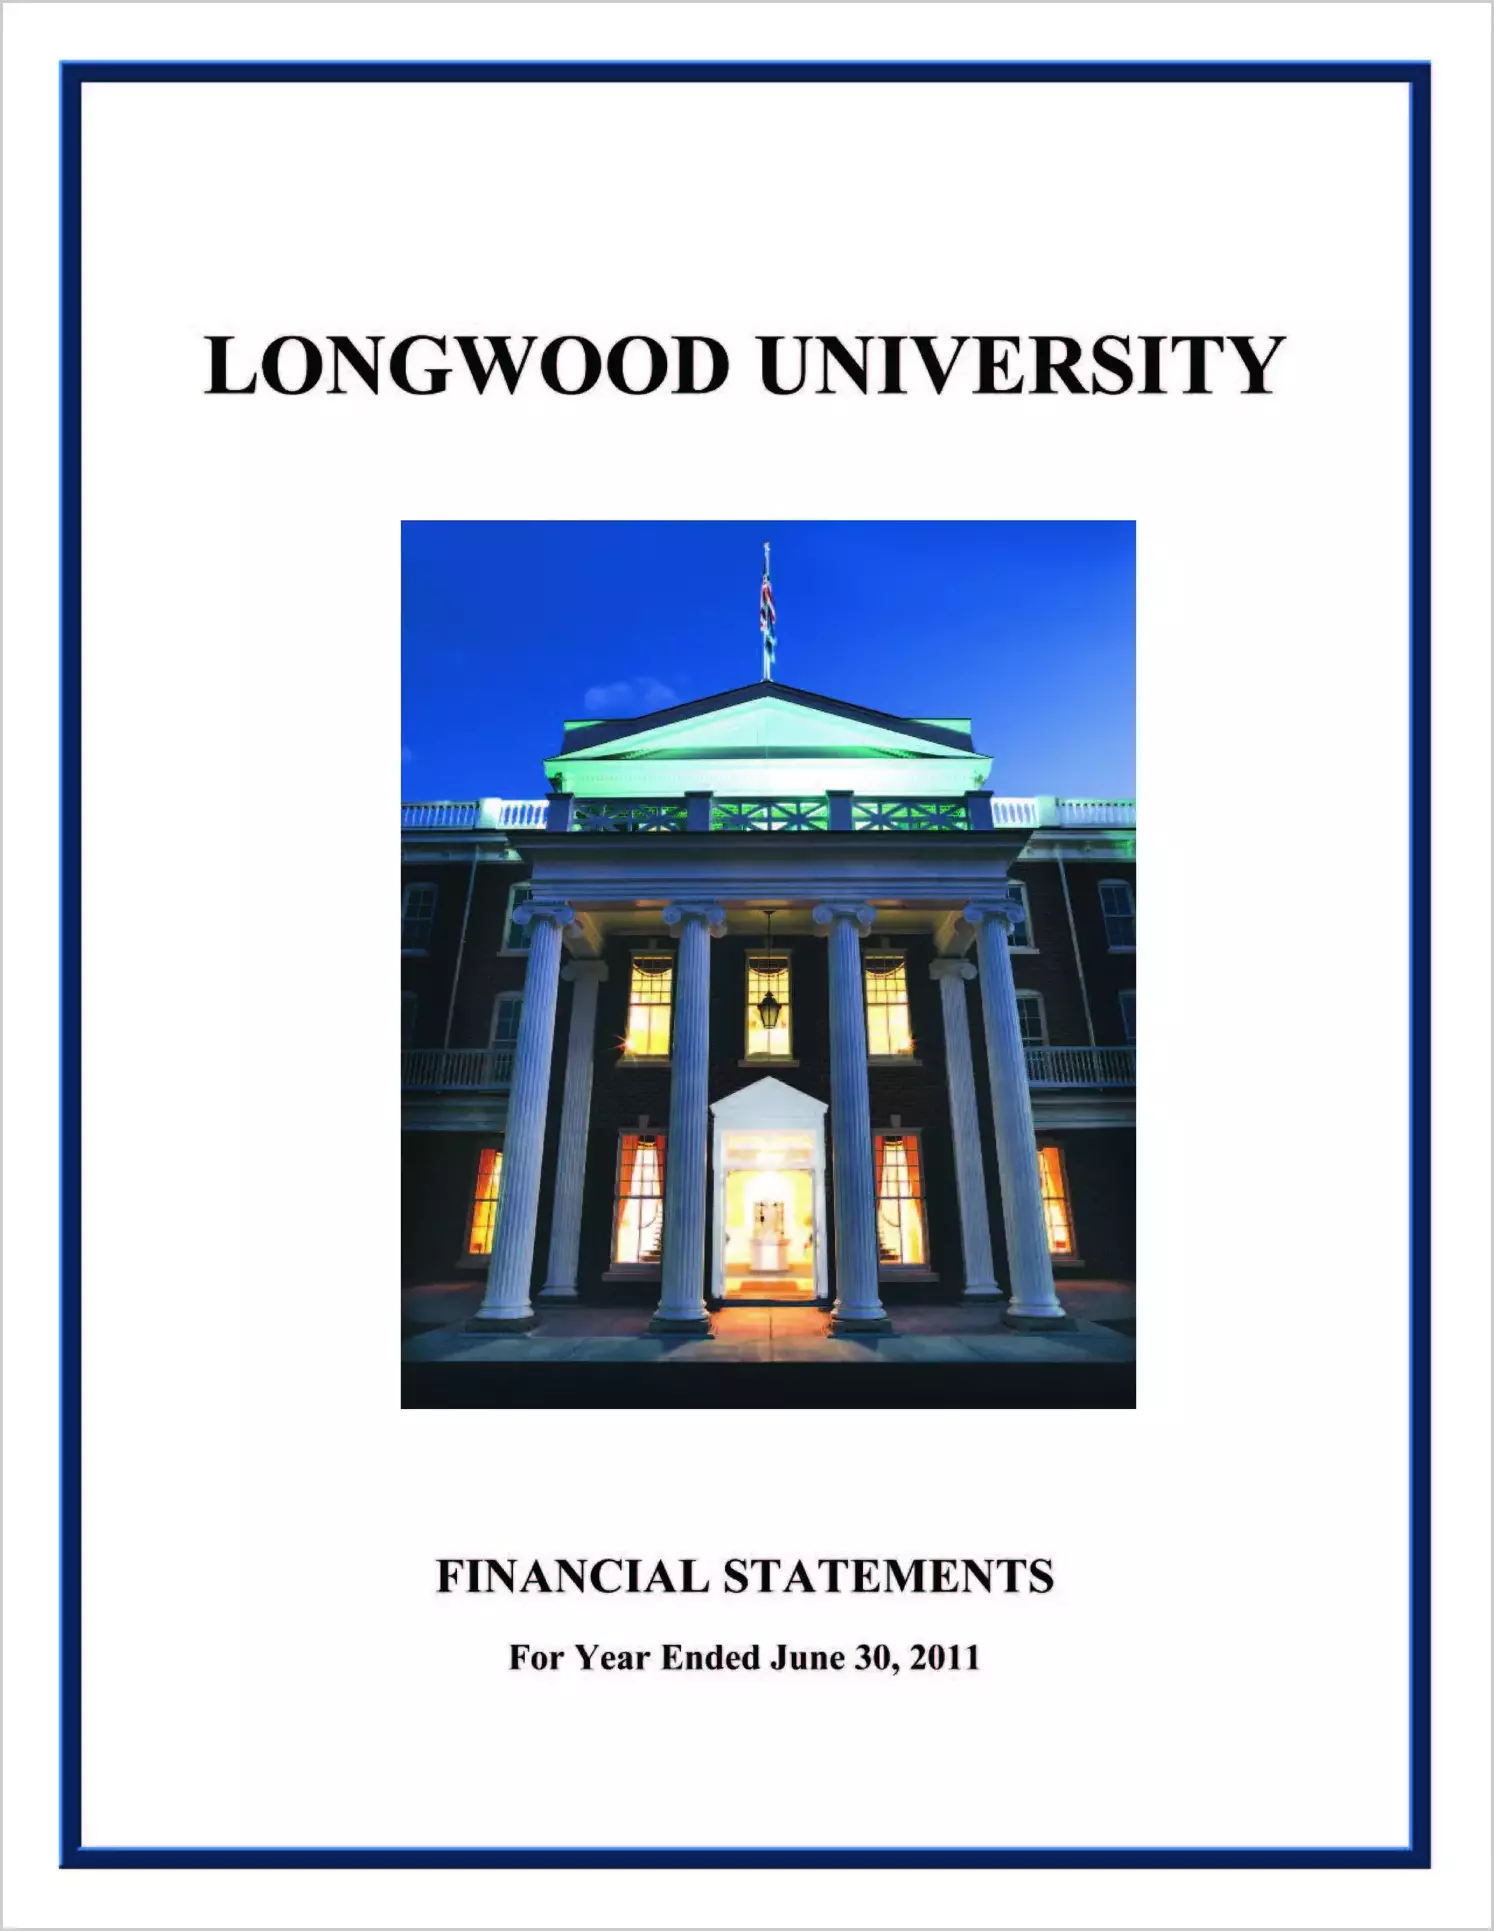 Longwood University Financial Statements report on audit for the year ended June 30, 2011